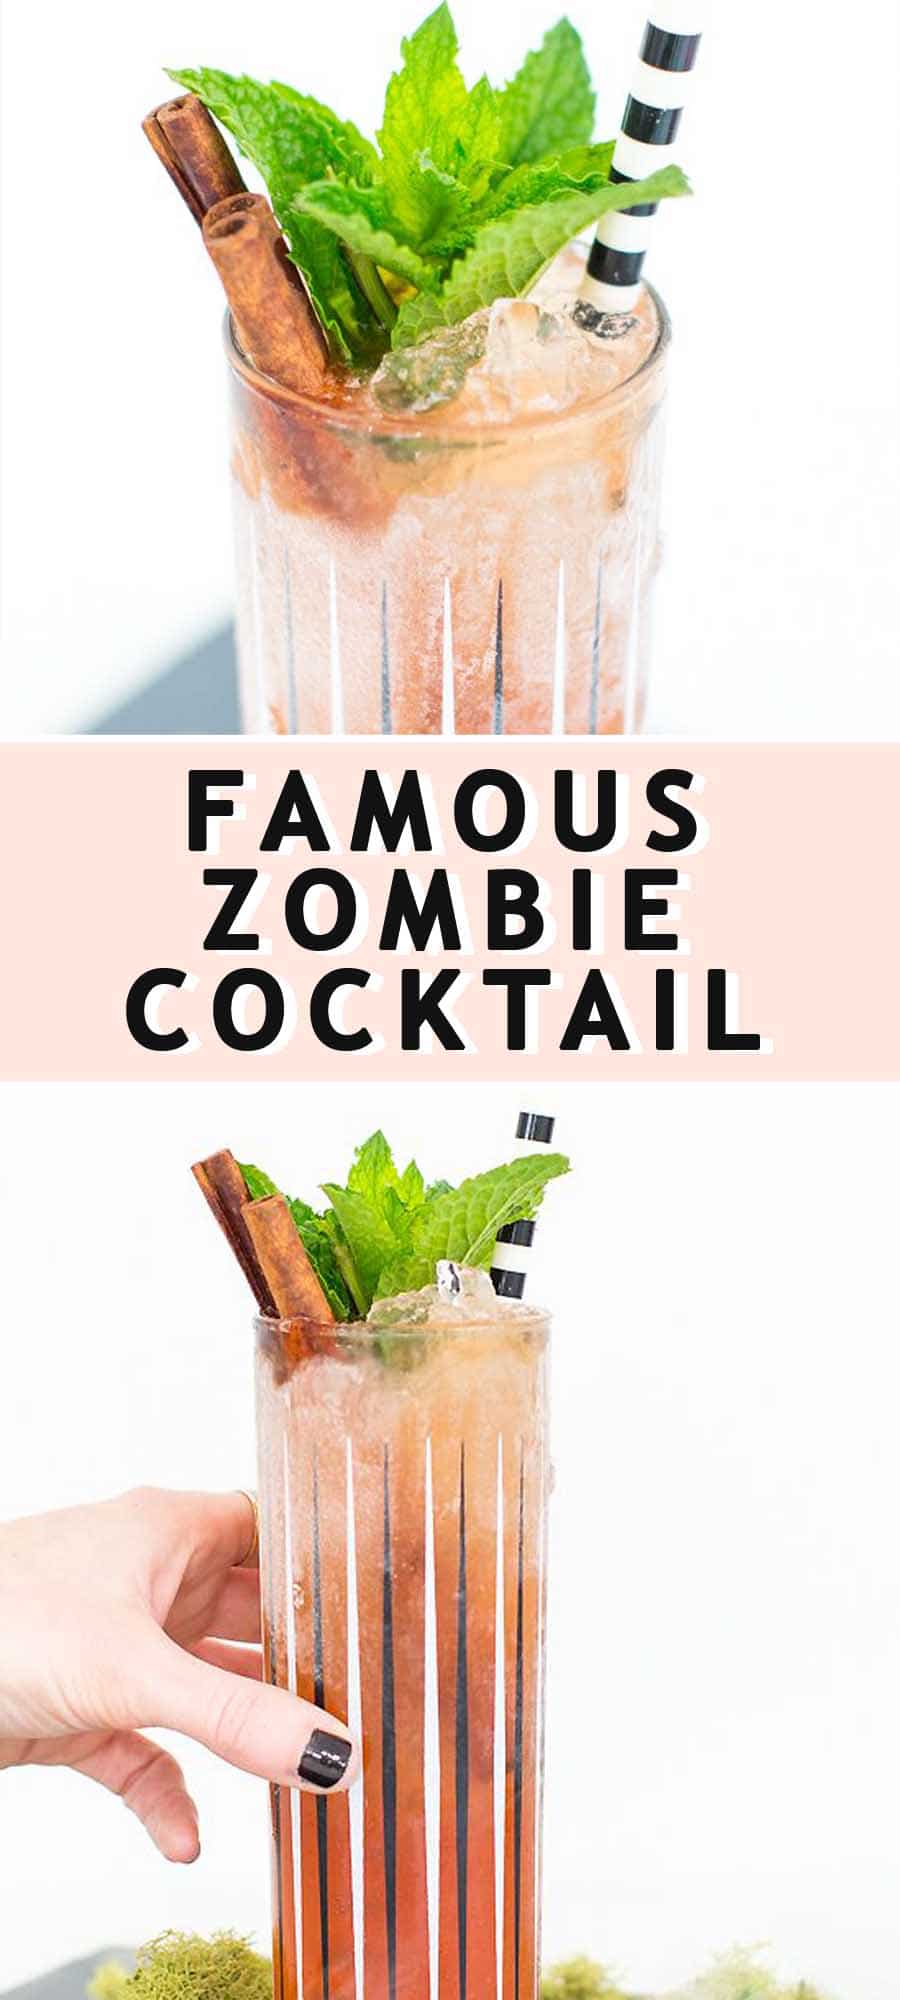 long photo with a graphic of a zombie cocktail